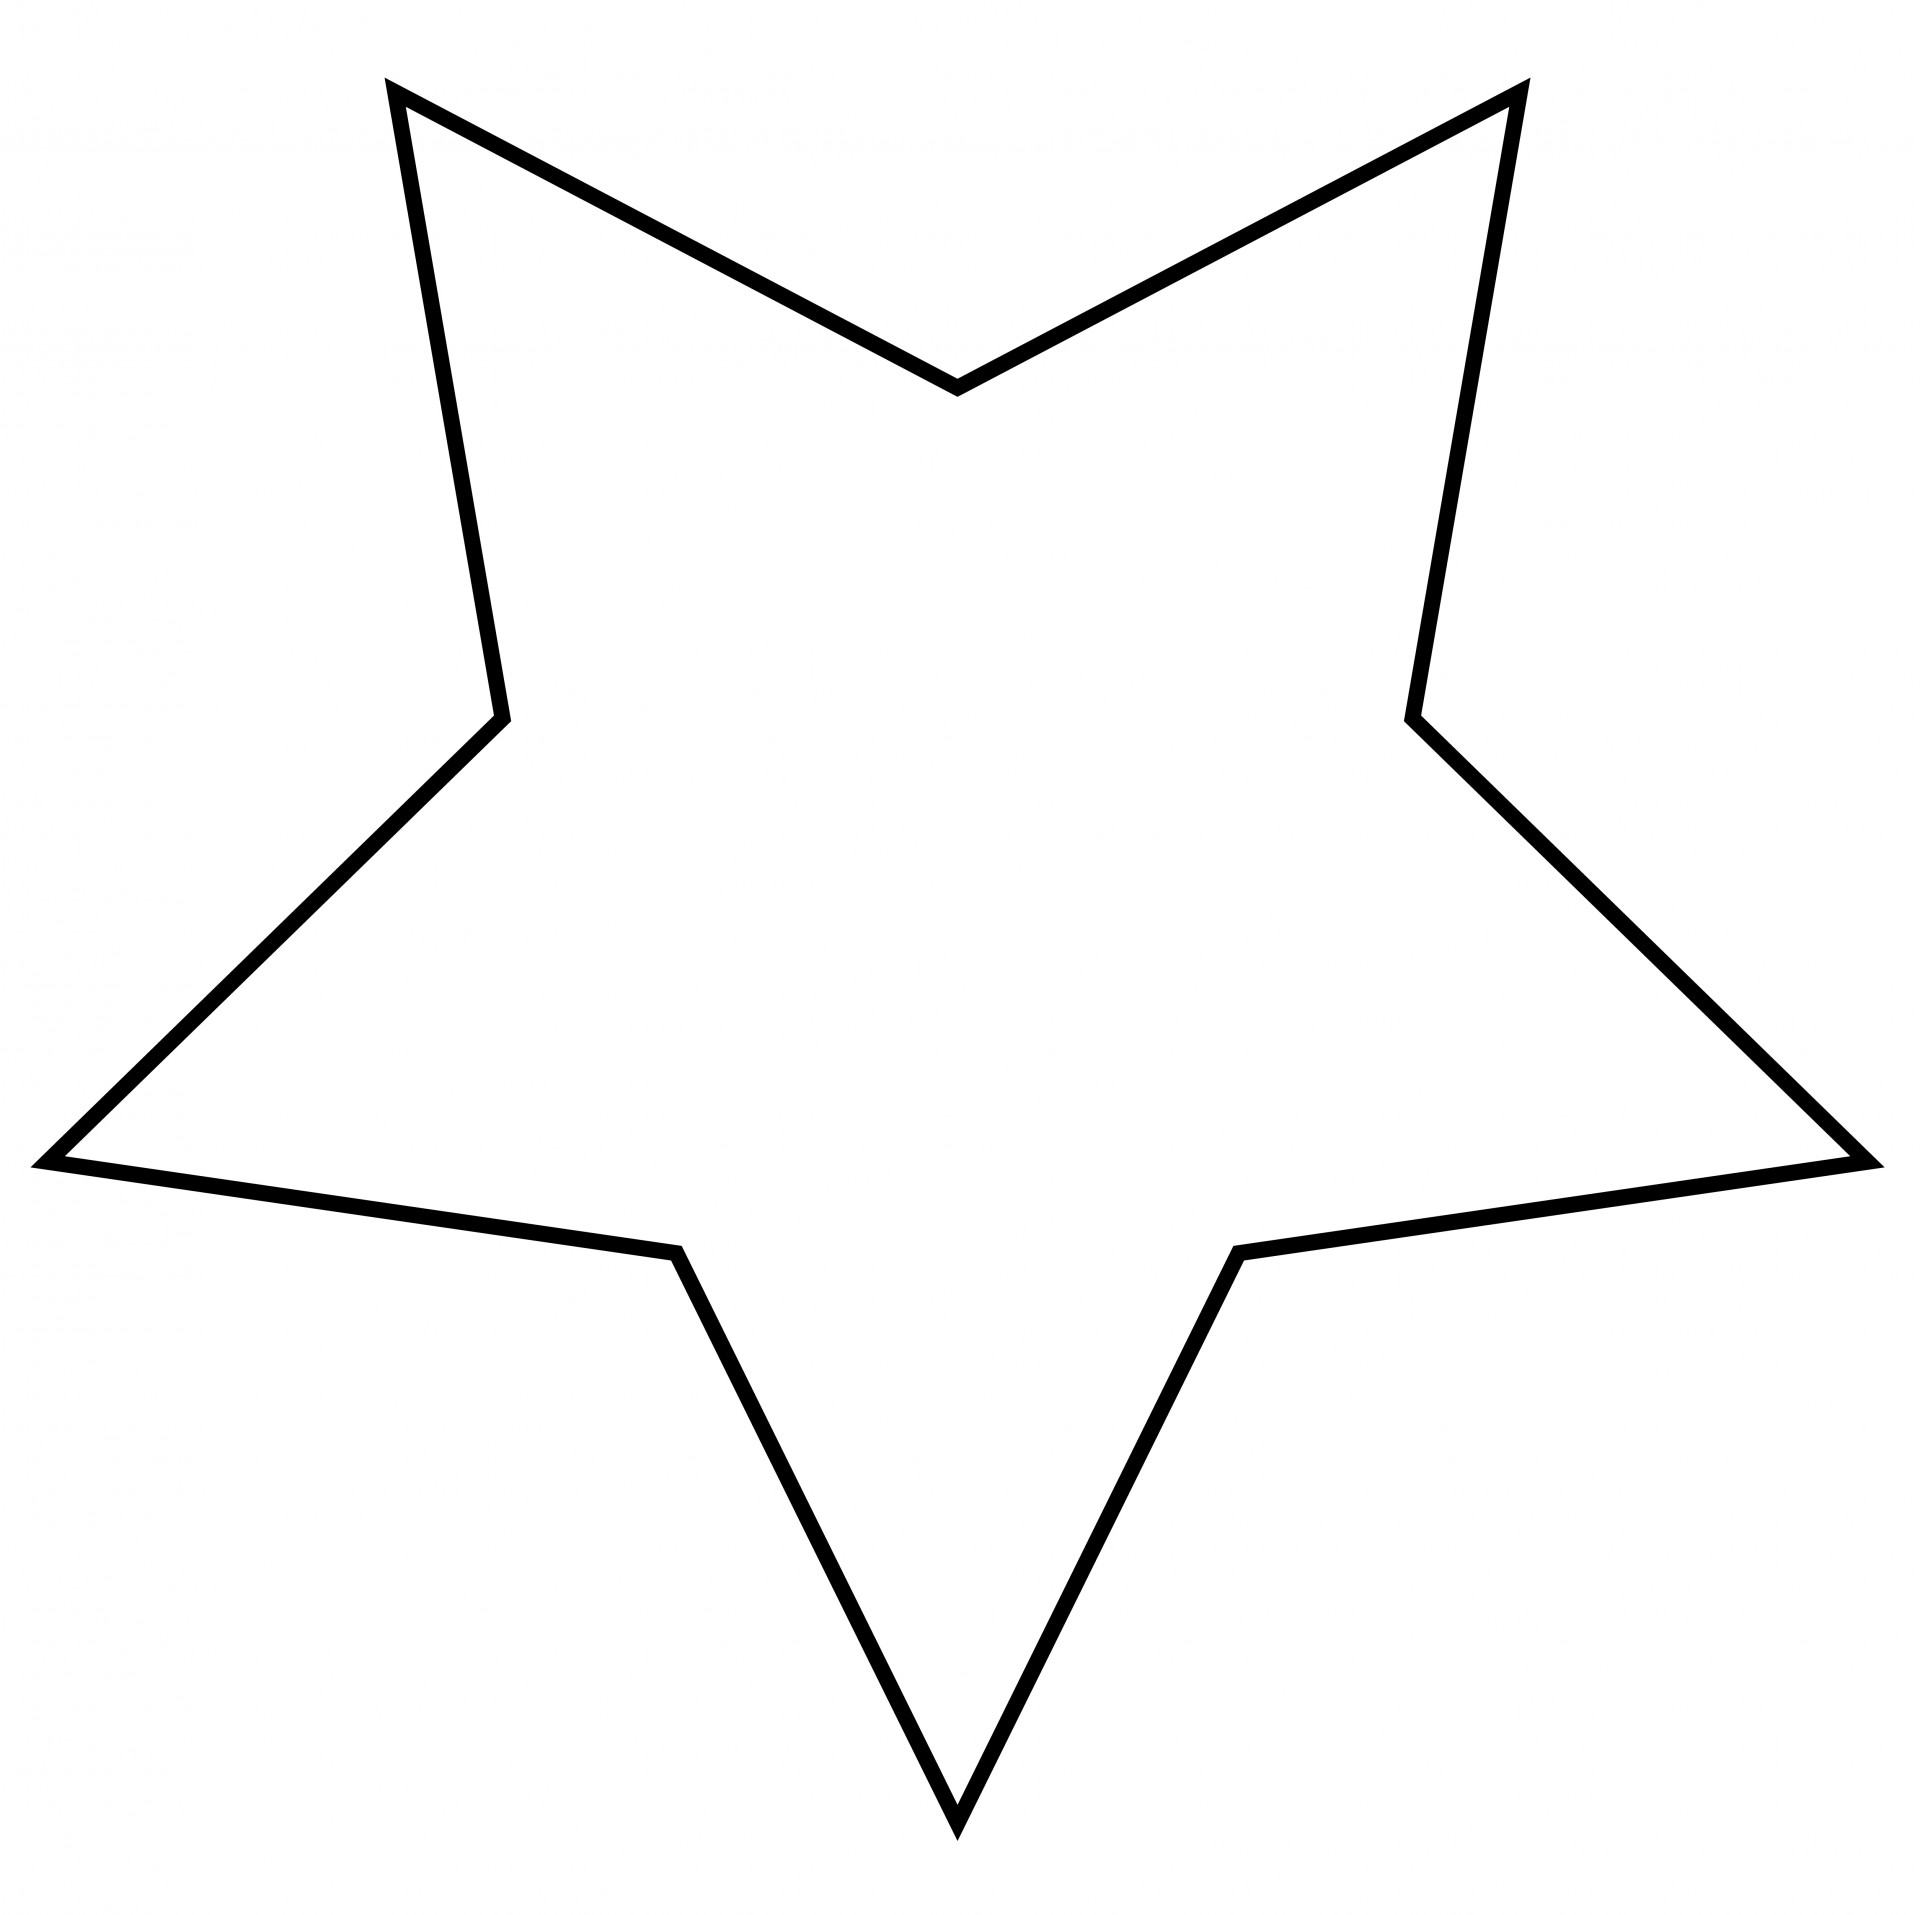 star-outline-images-4-inch-star-pattern-use-the-printable-outline